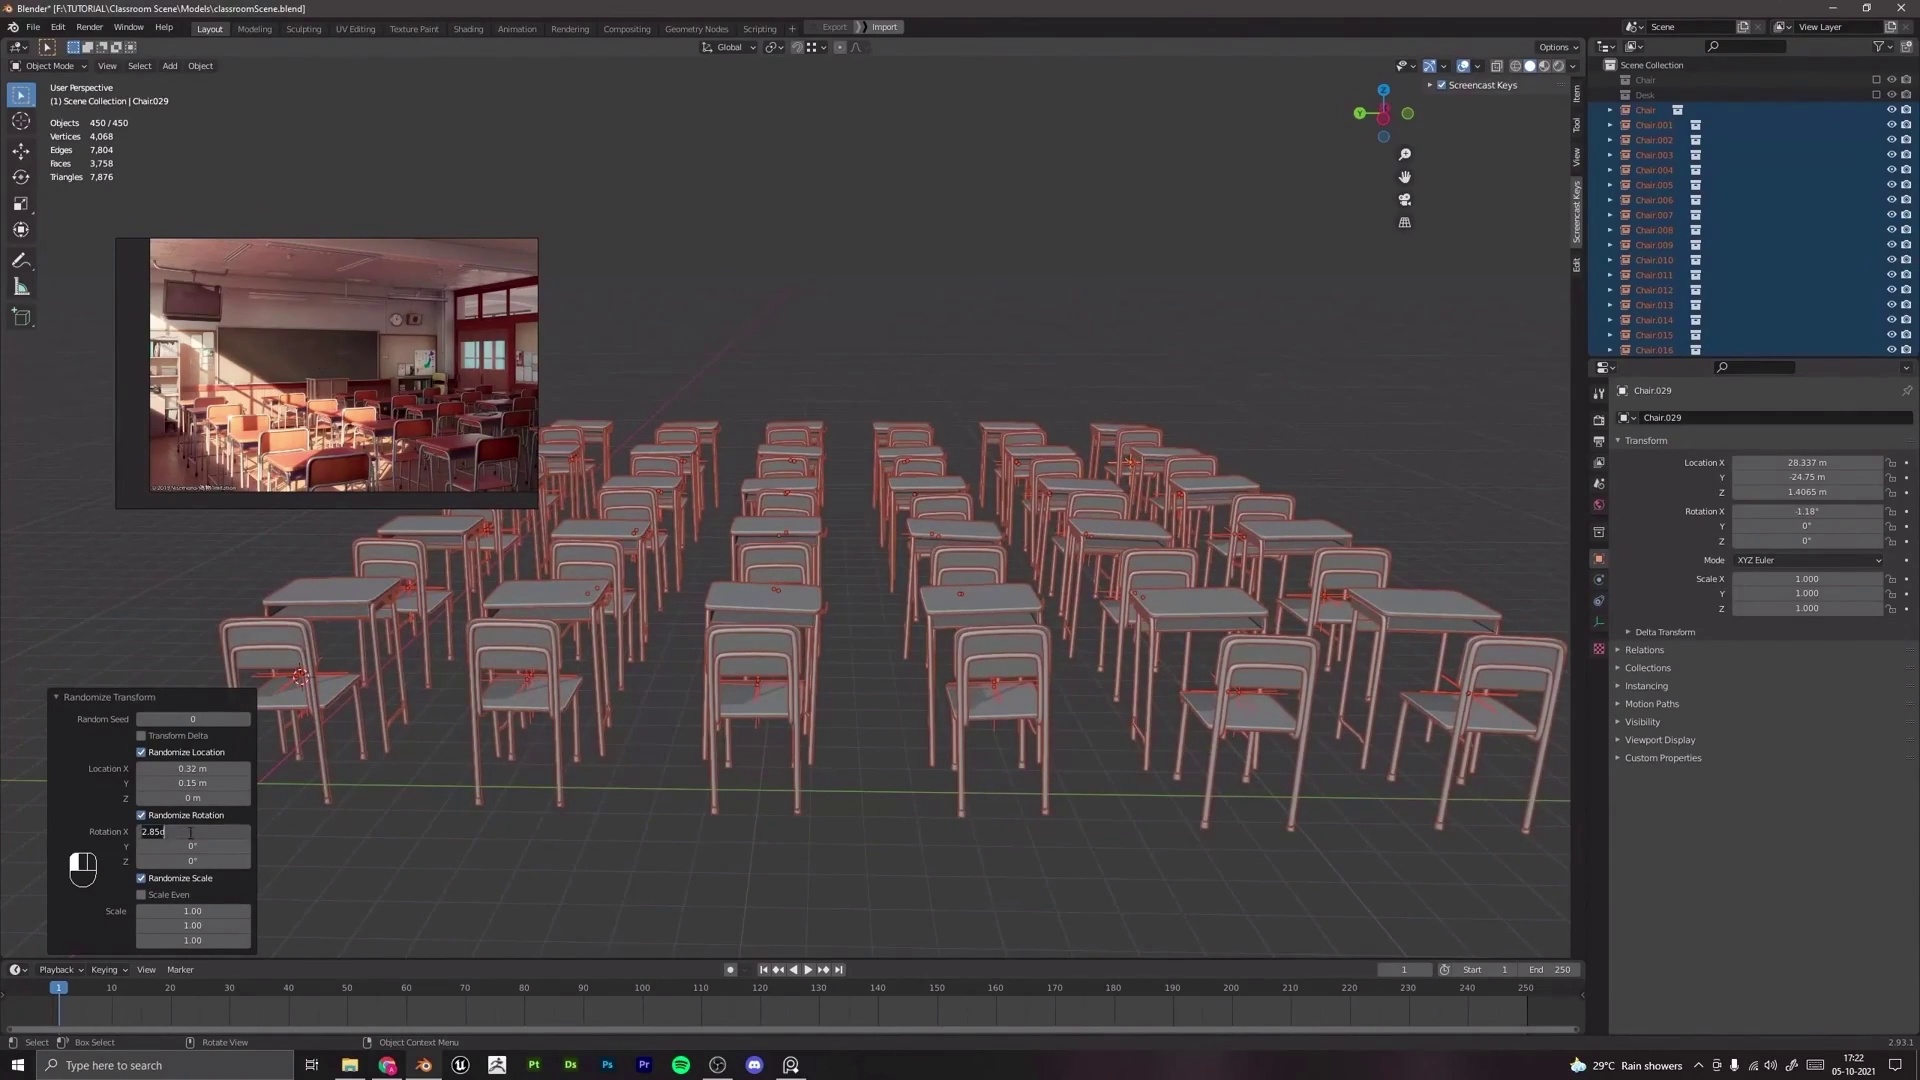 3D Photorealistic Classroom Environment Creation in Blender